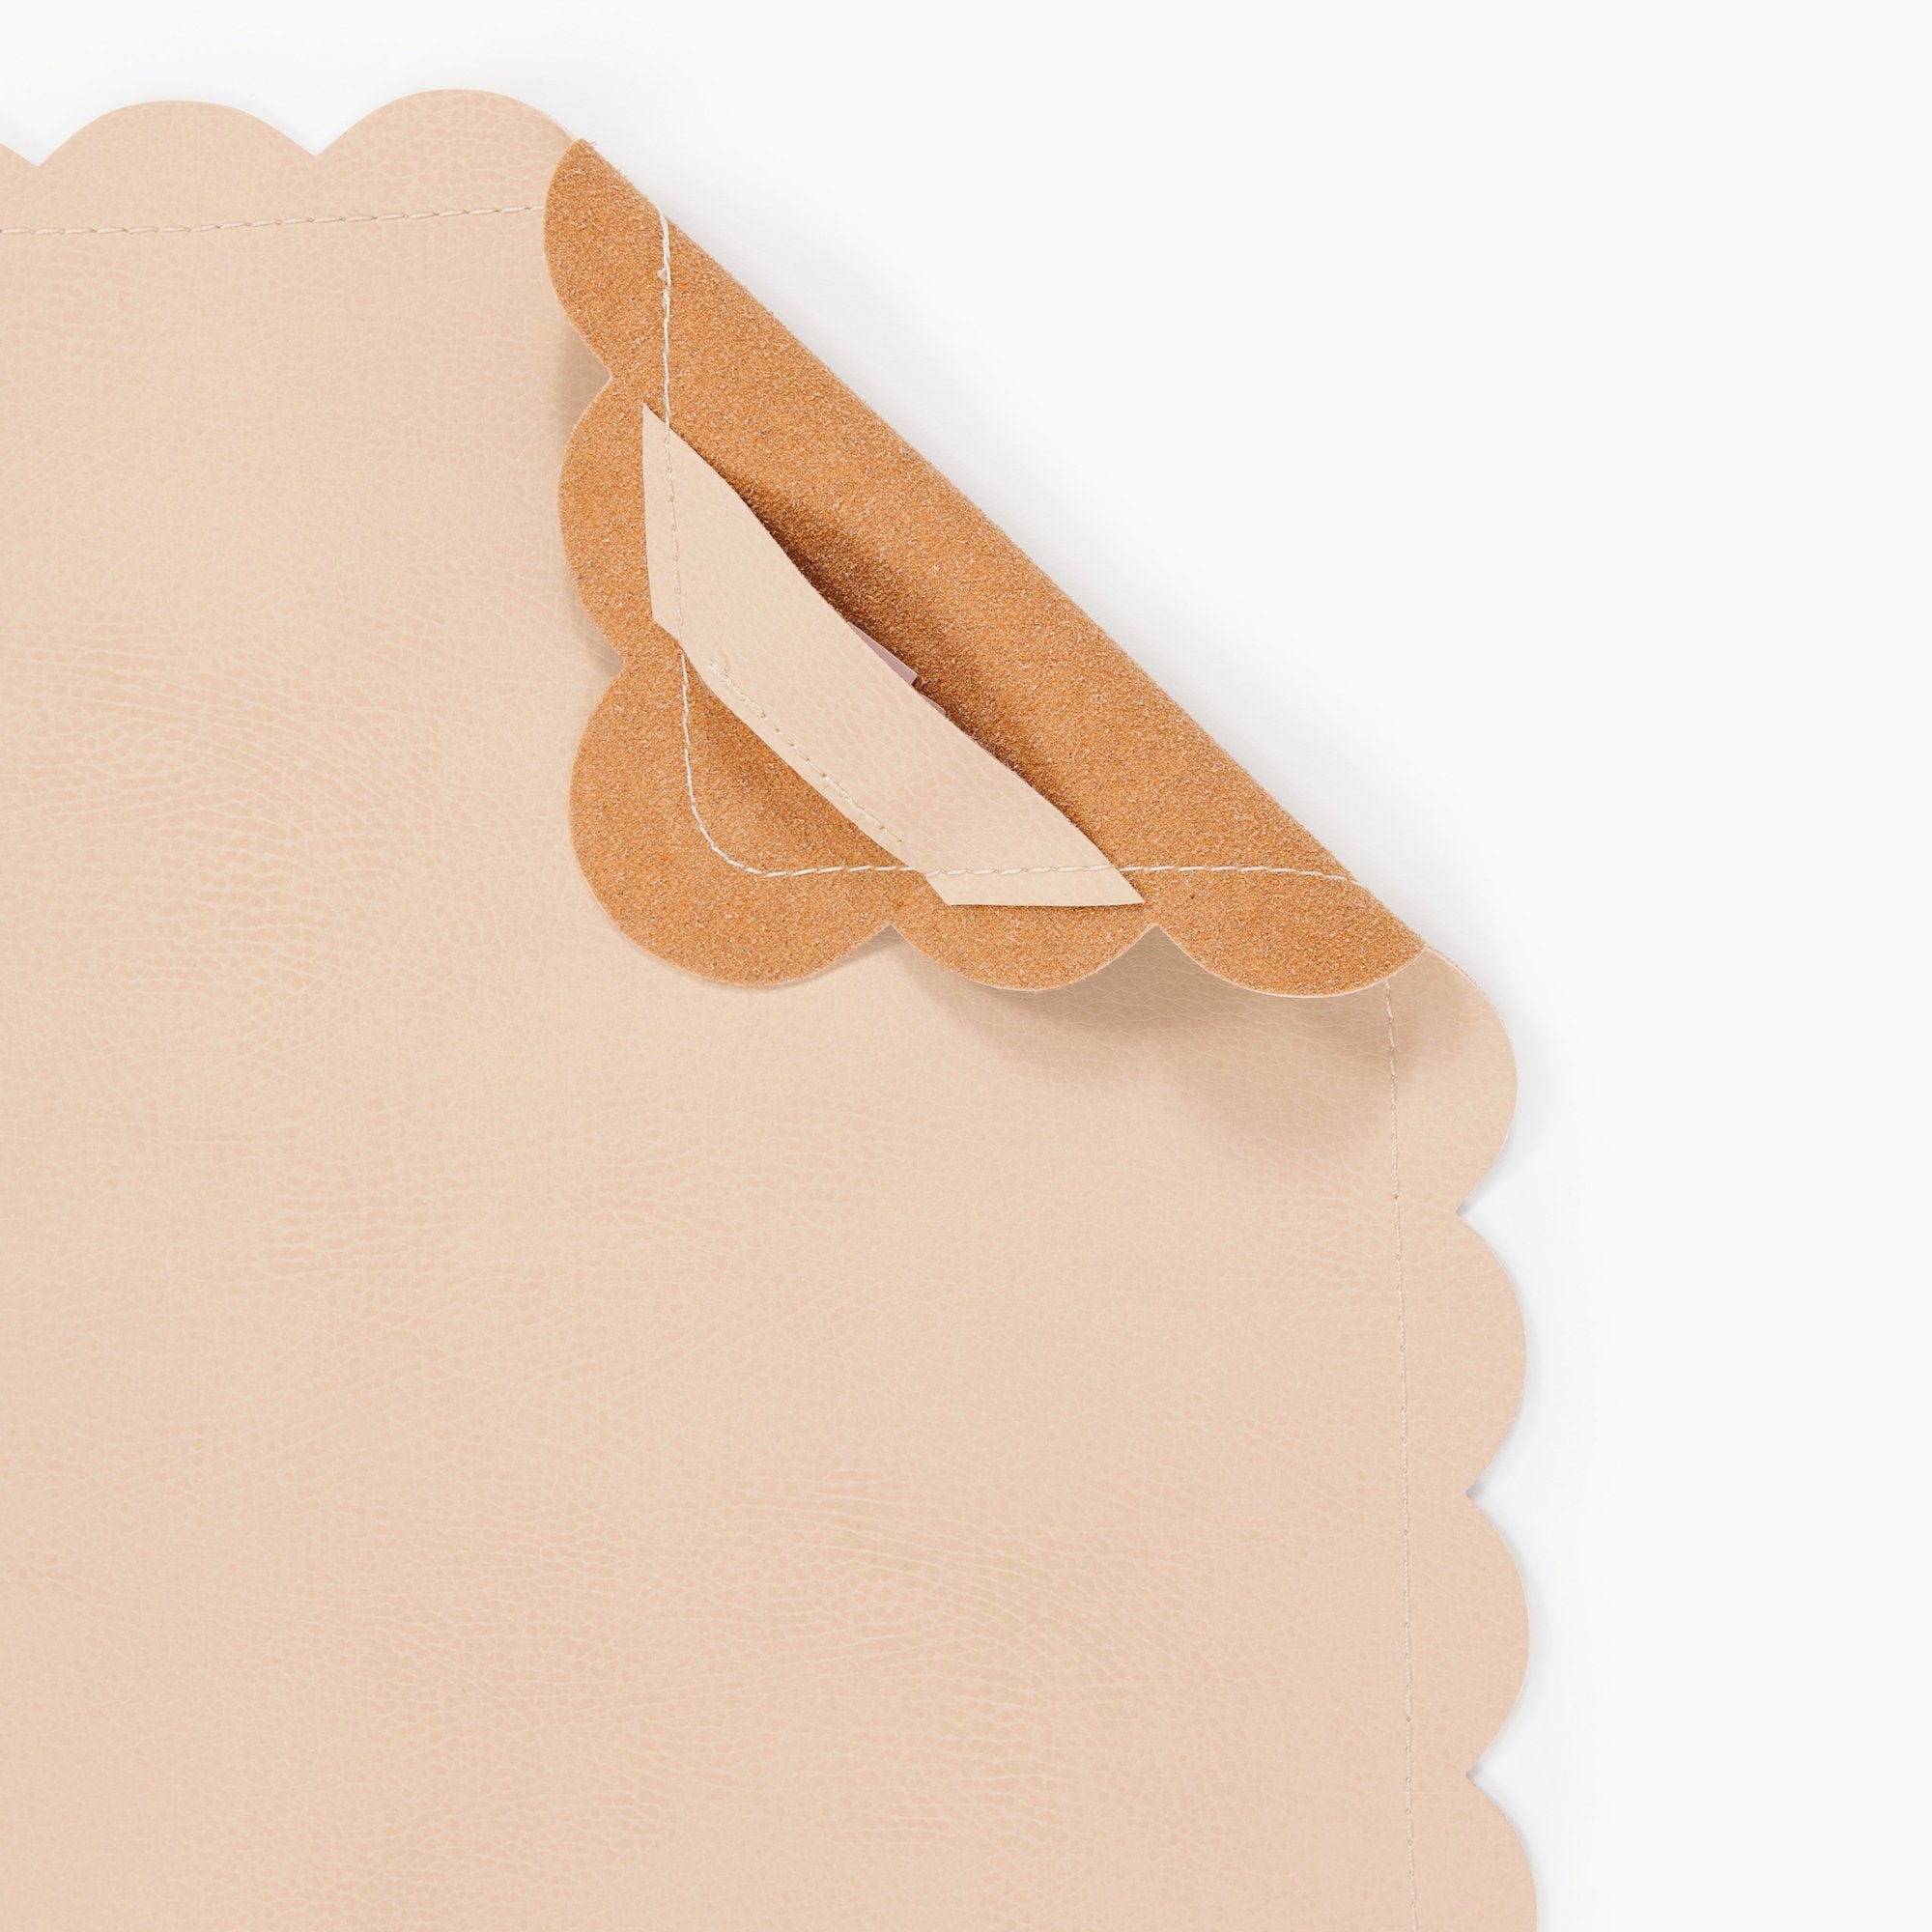 Untanned Scallop@Hanging tab detail on the Untanned Scallop Midi+